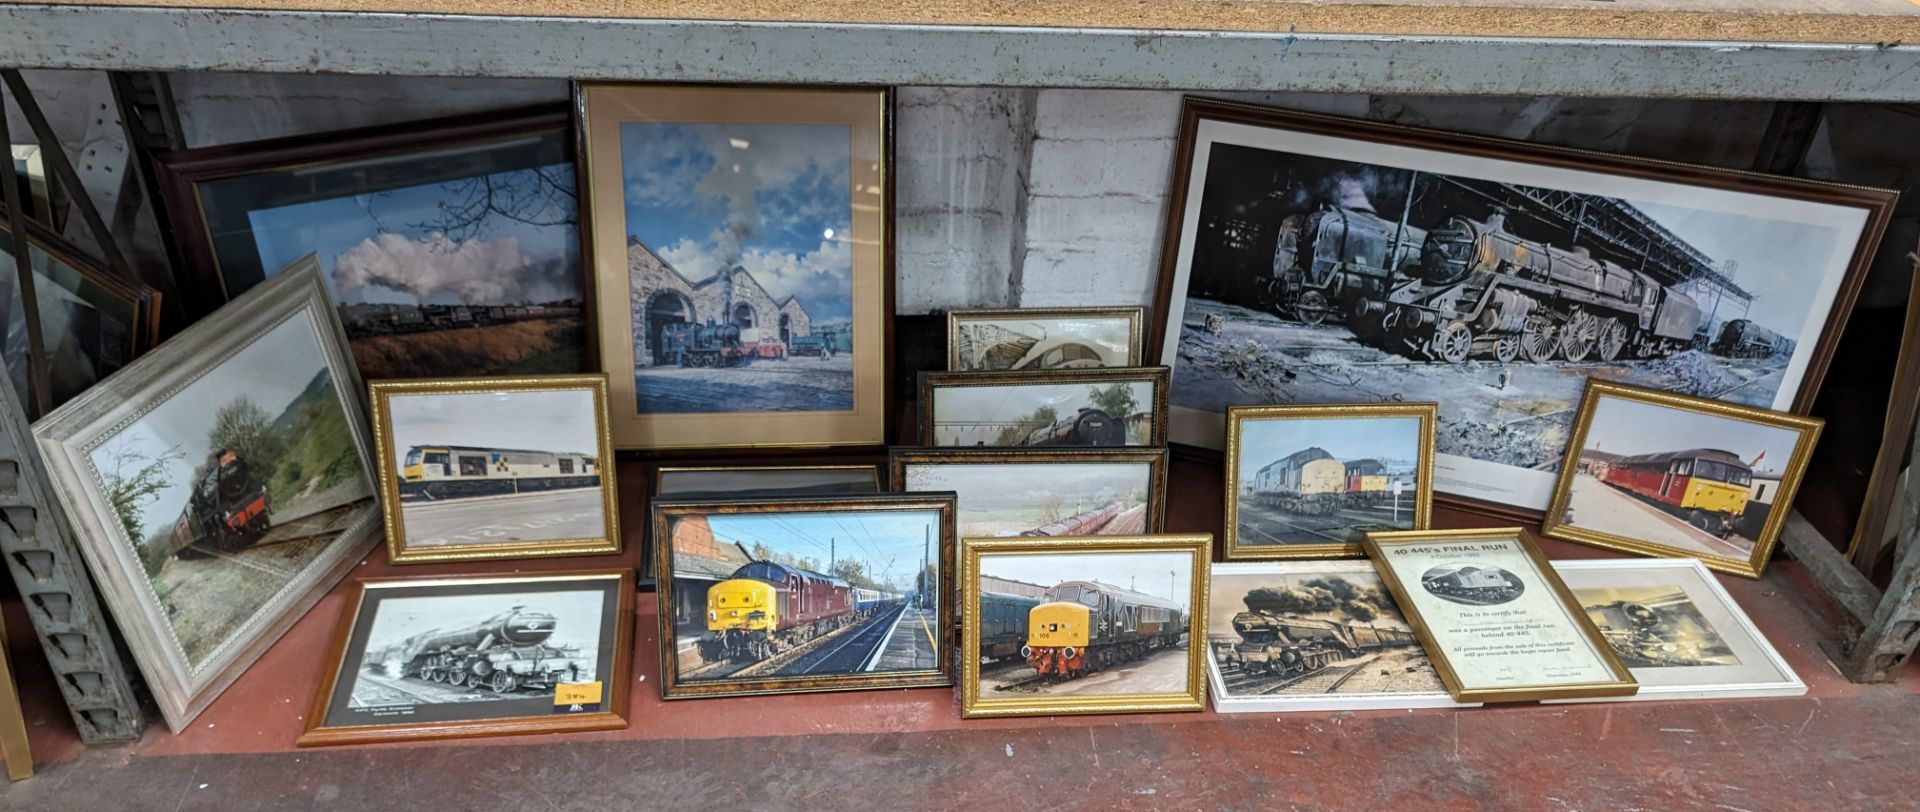 The contents of a bay of railway related photographs & pictures, all individually framed - 17 items